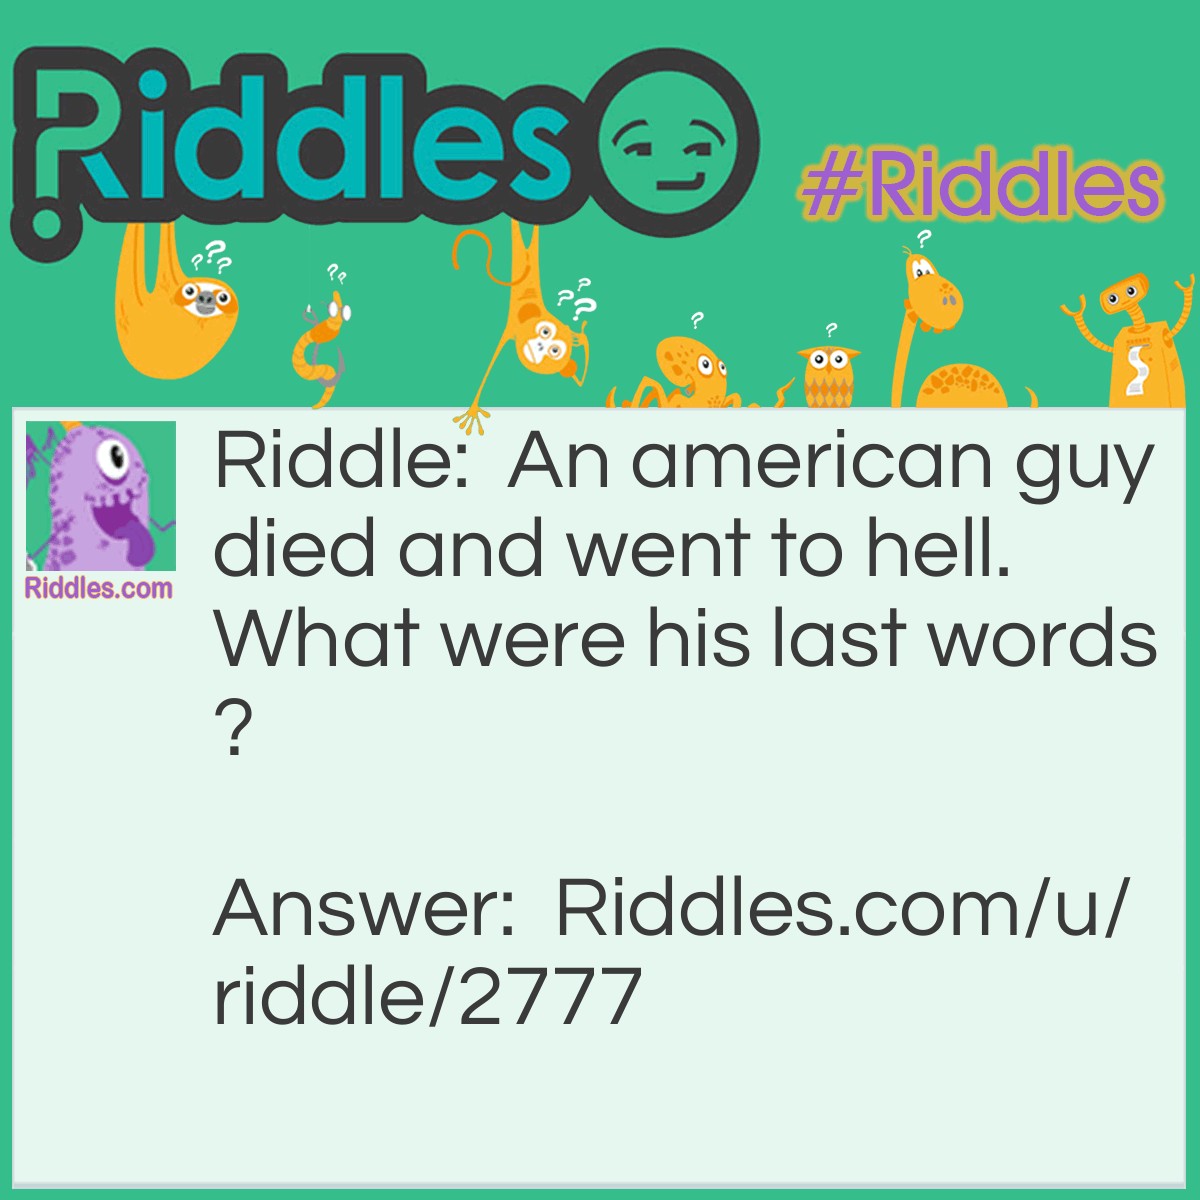 Riddle: An american guy died and went to hell. What were his last words? Answer: Hell-O (Hello)